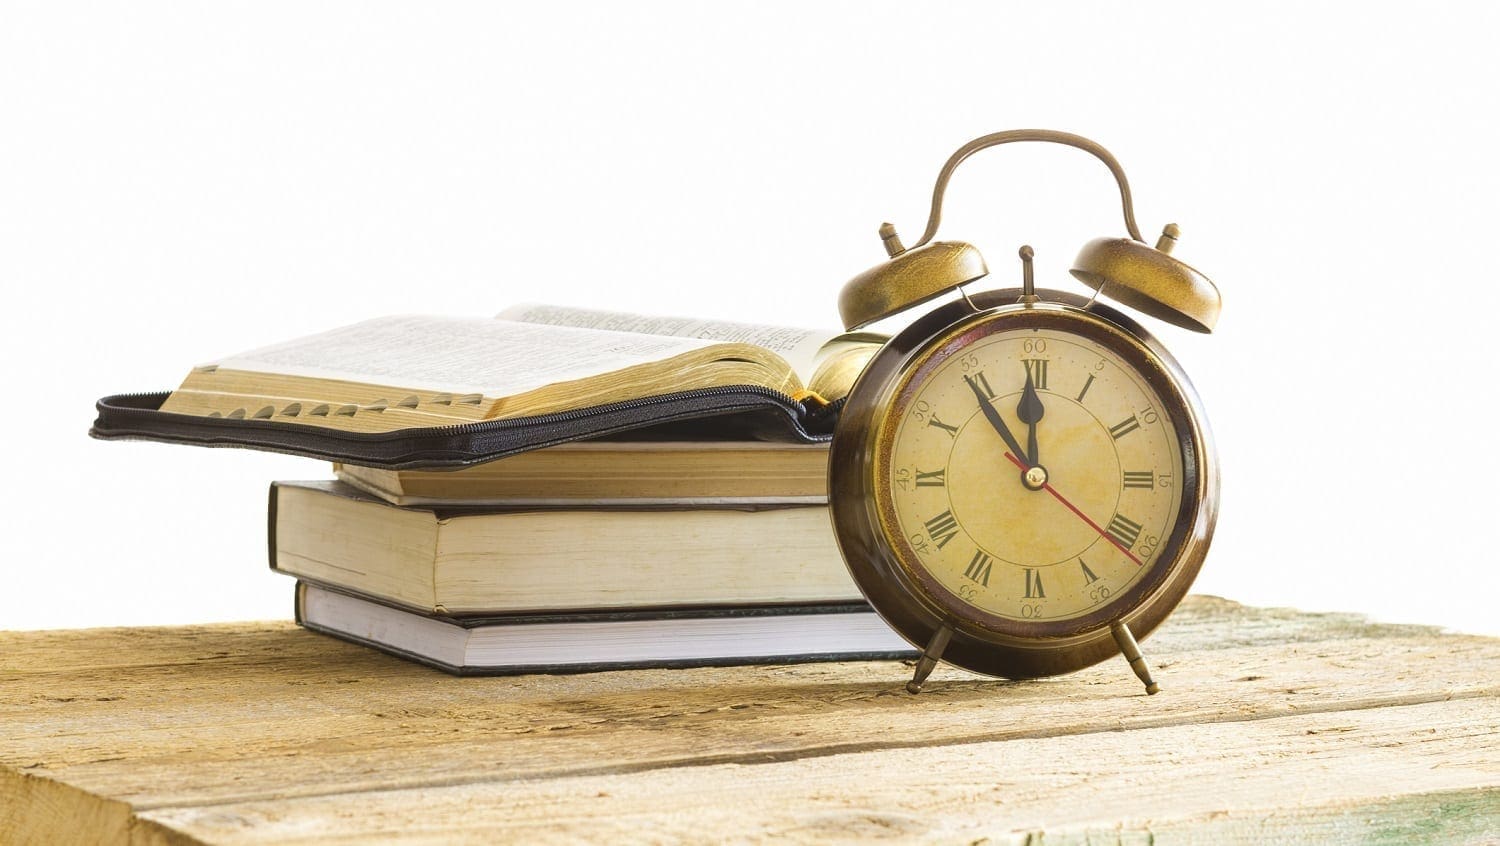 Bible on pile of books with alarm clock: ID 41050886 © Manaemedia | Dreamstime.com